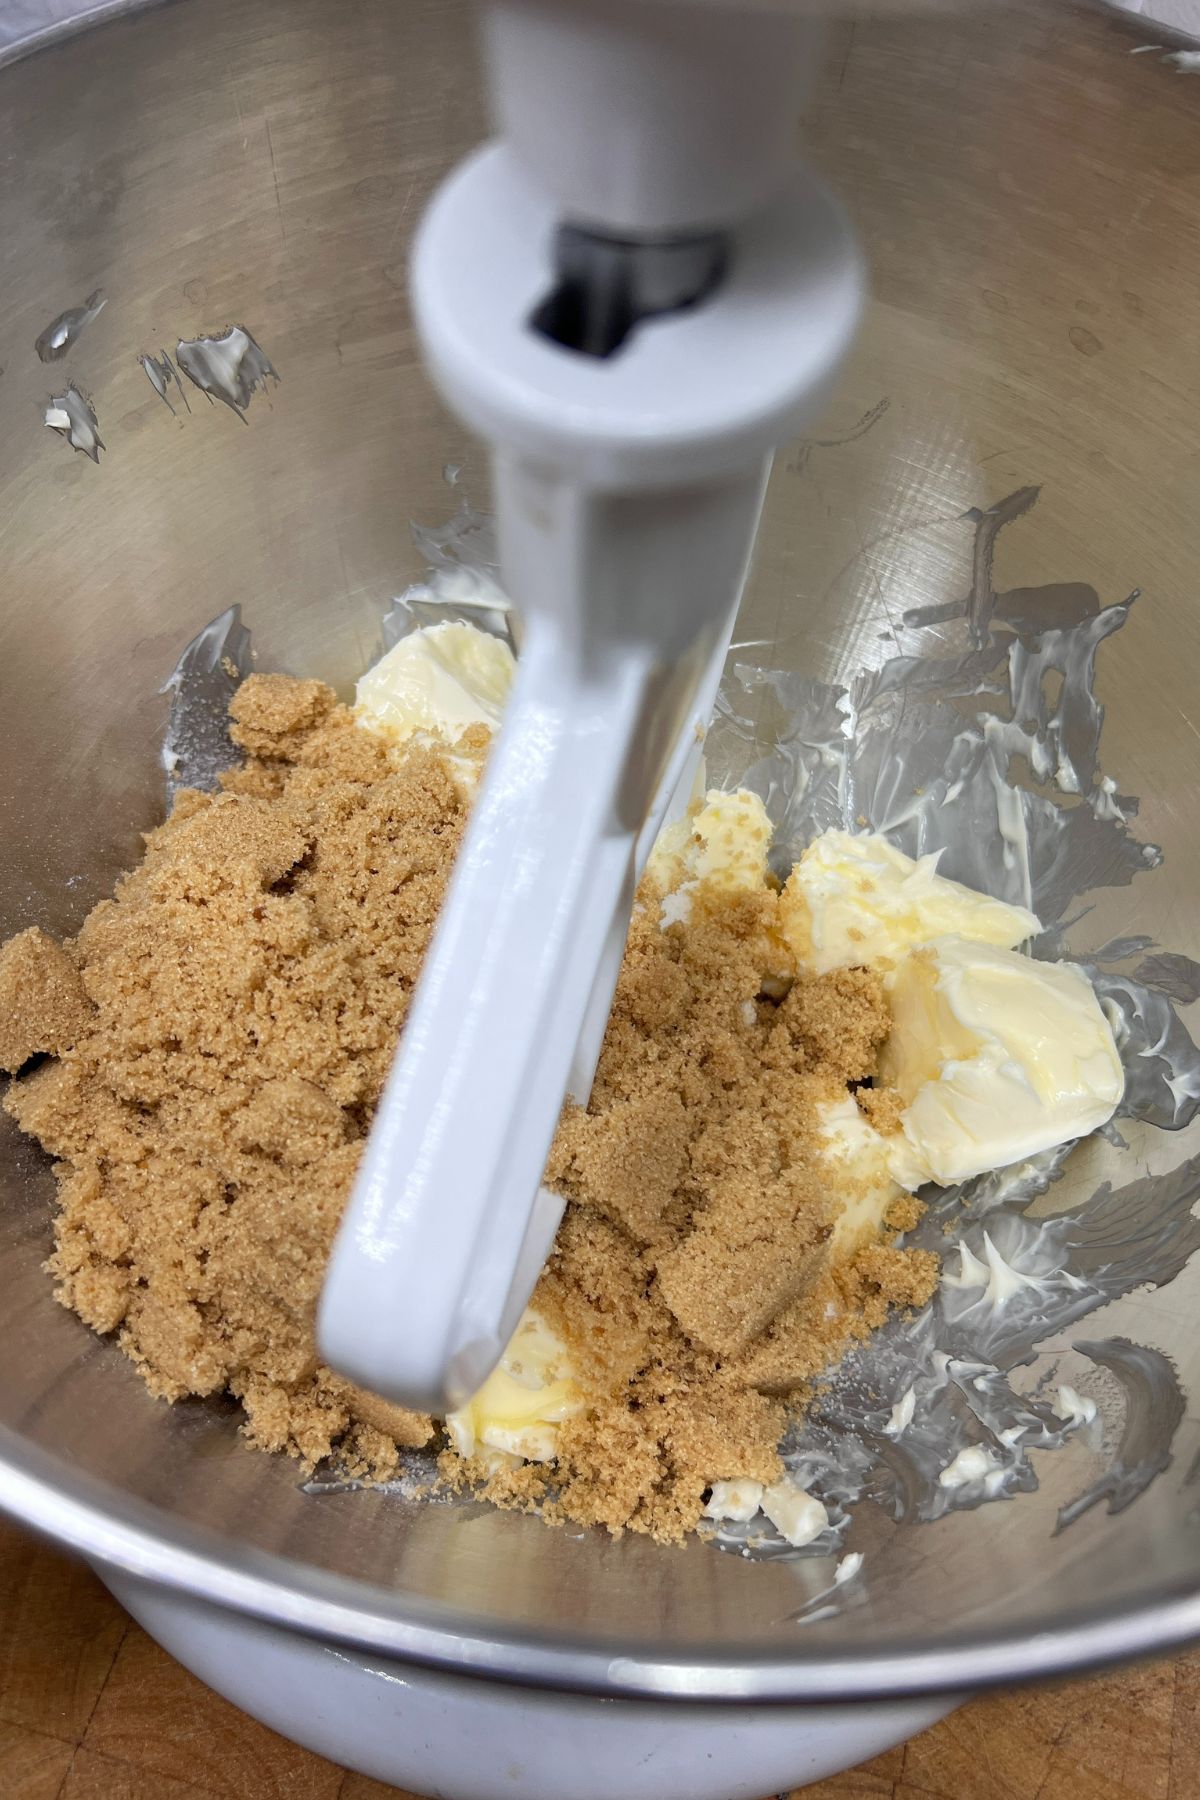 Sugar and softened butter in a mixing bowl.